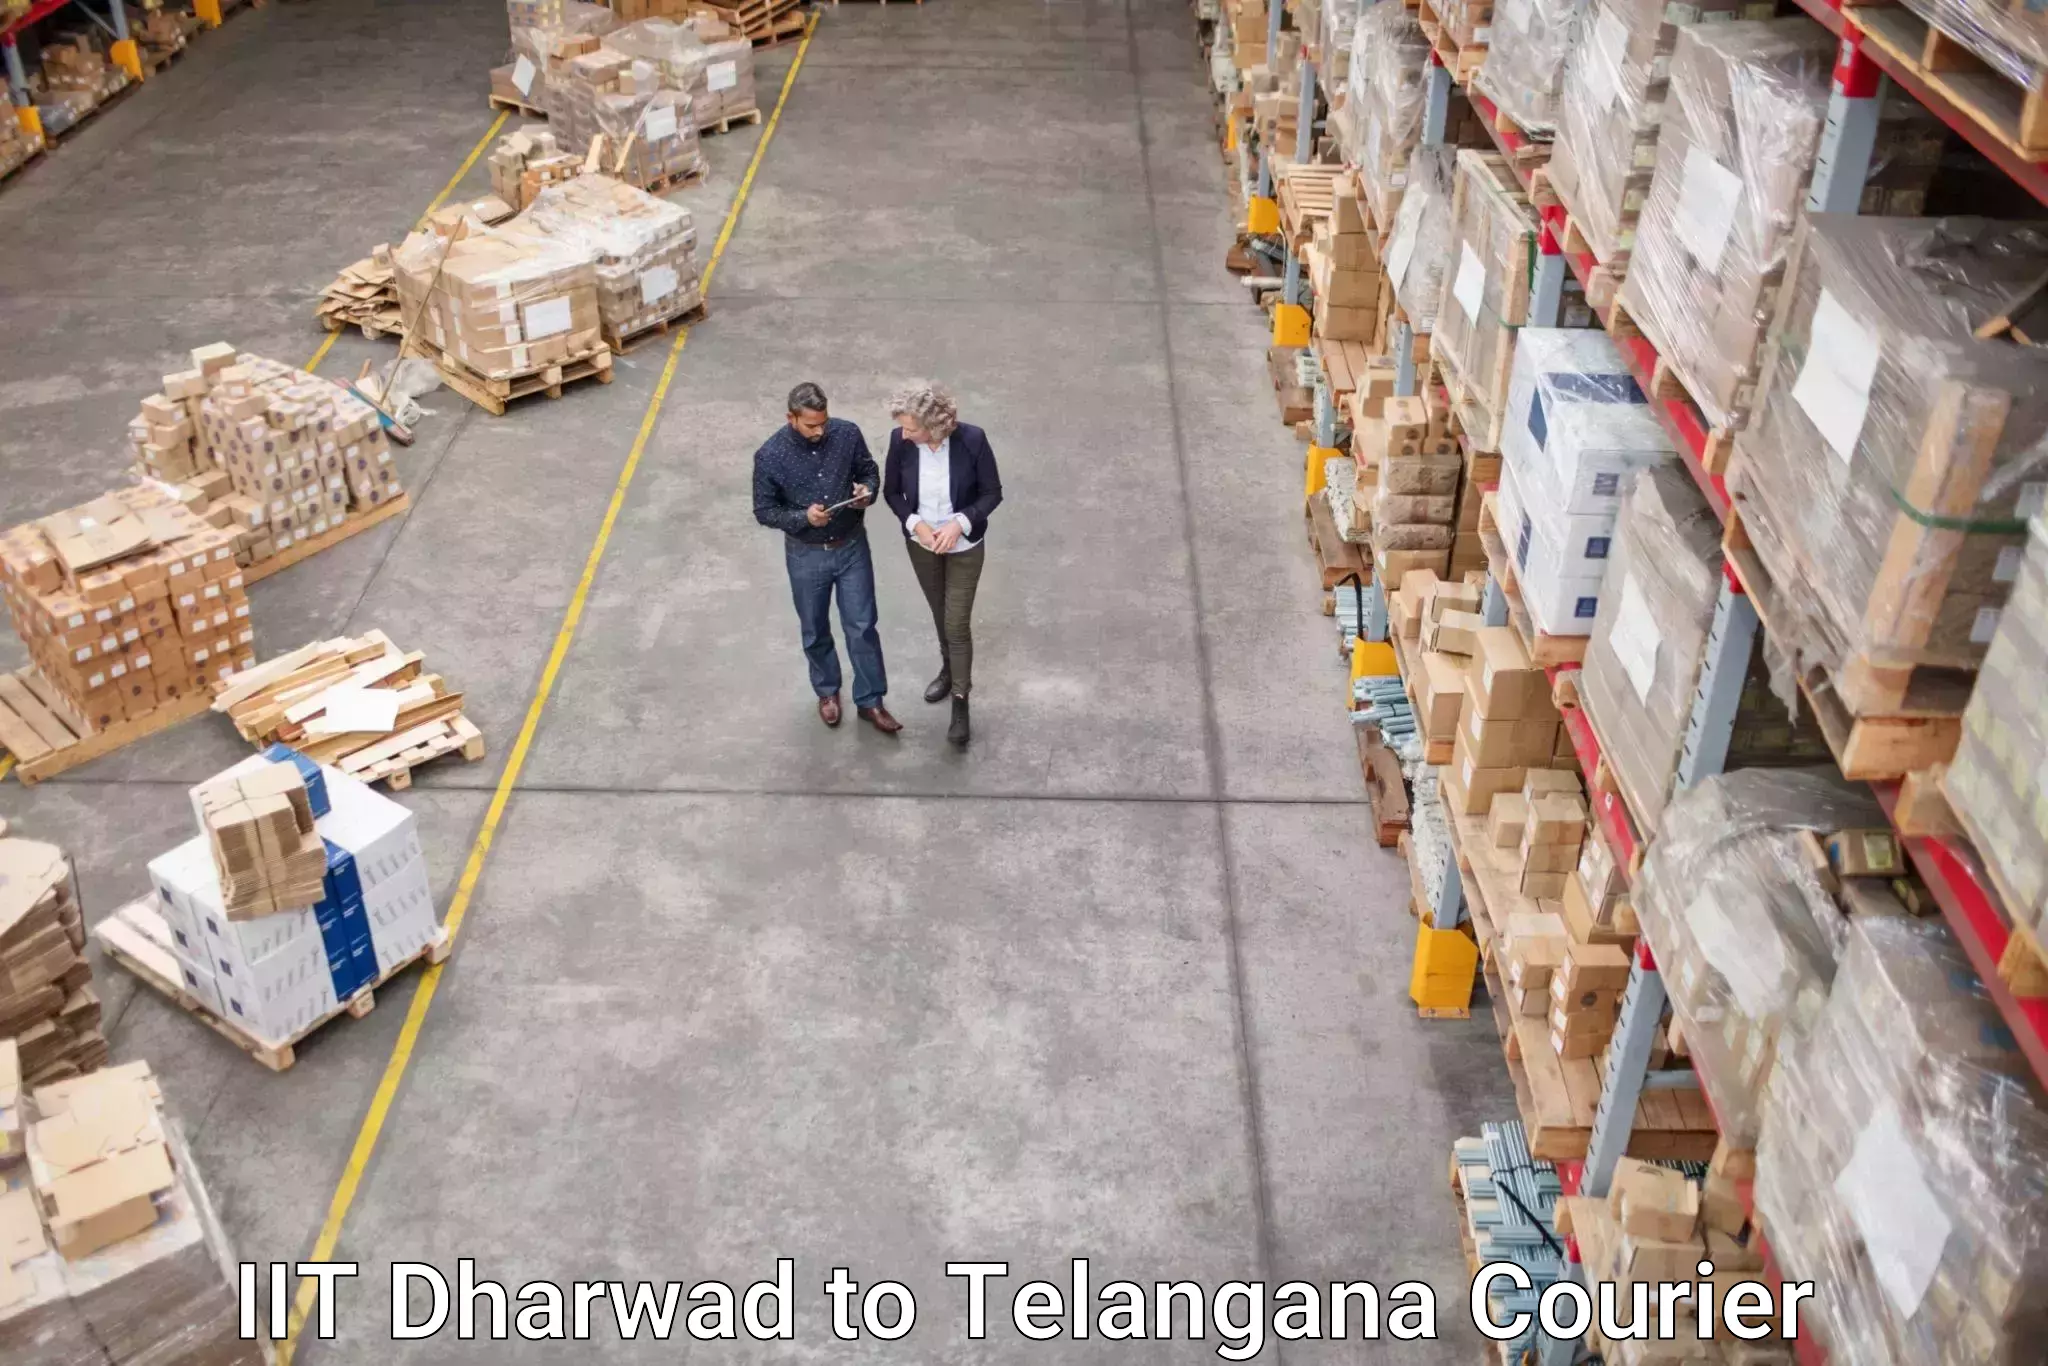 User-friendly delivery service IIT Dharwad to Rudrangi